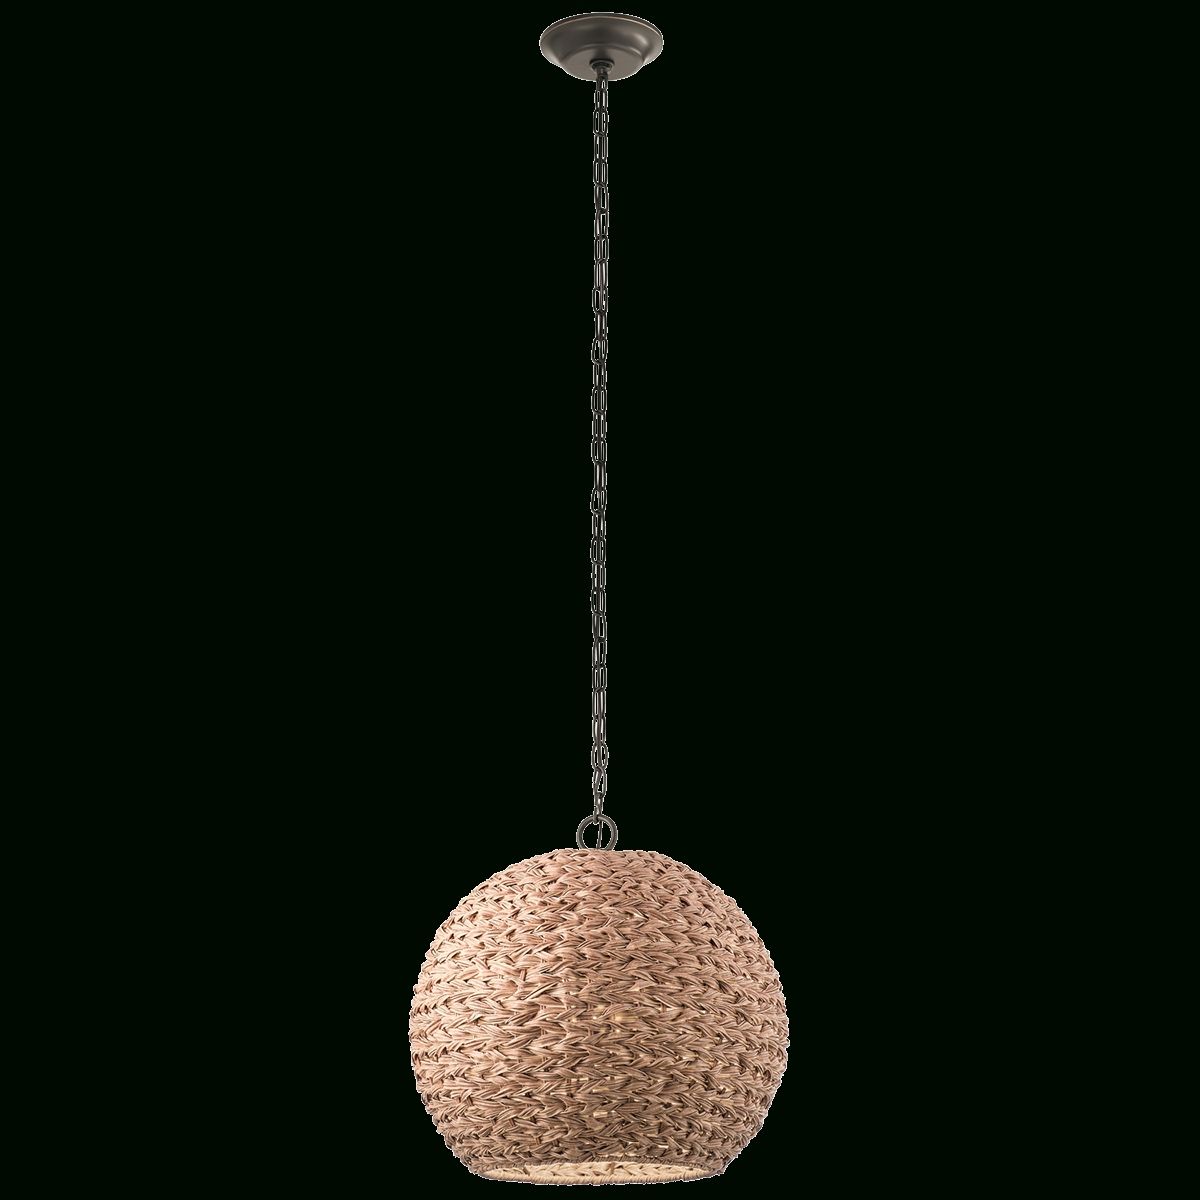 Palisades Natural Wicker 1 Light Outdoor Pendant Oz Inside Popular Outdoor Pendant Kichler Lighting (View 12 of 20)